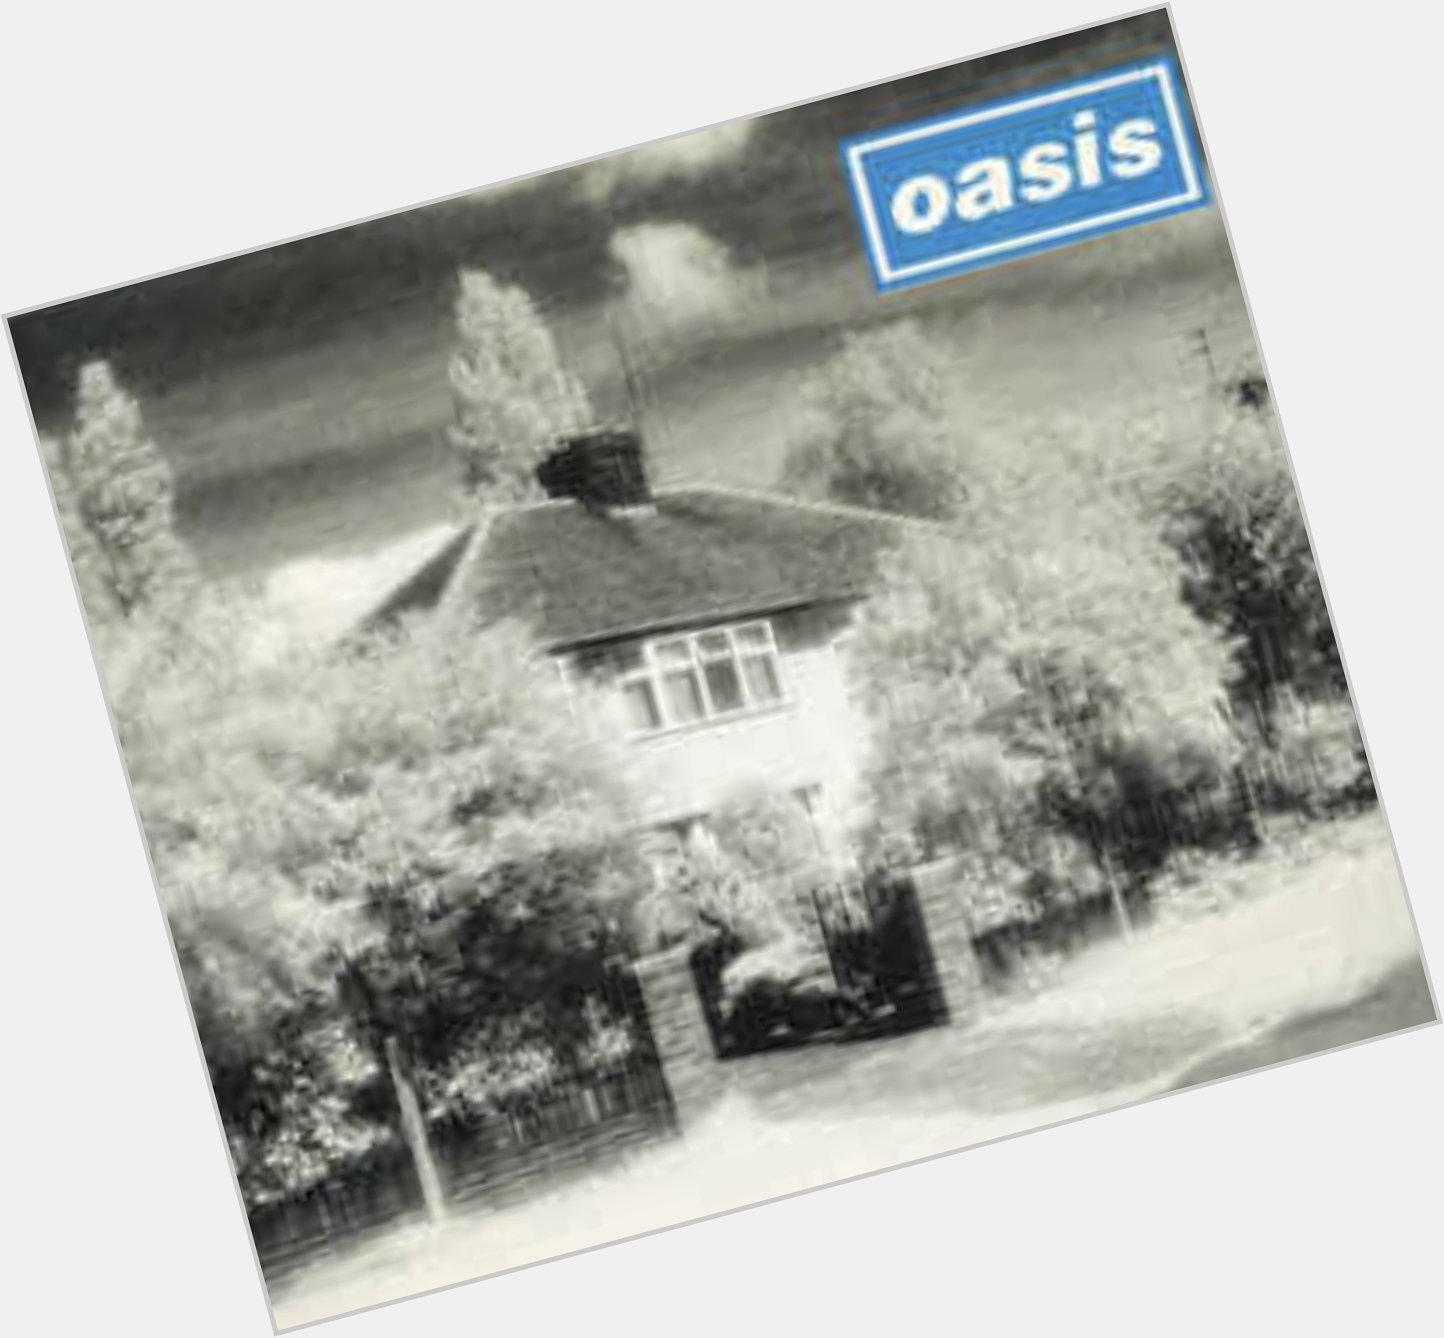 Oasis Live Forever from the album Definitely Maybe. Happy Birthday to the  amazing Noel Gallagher 